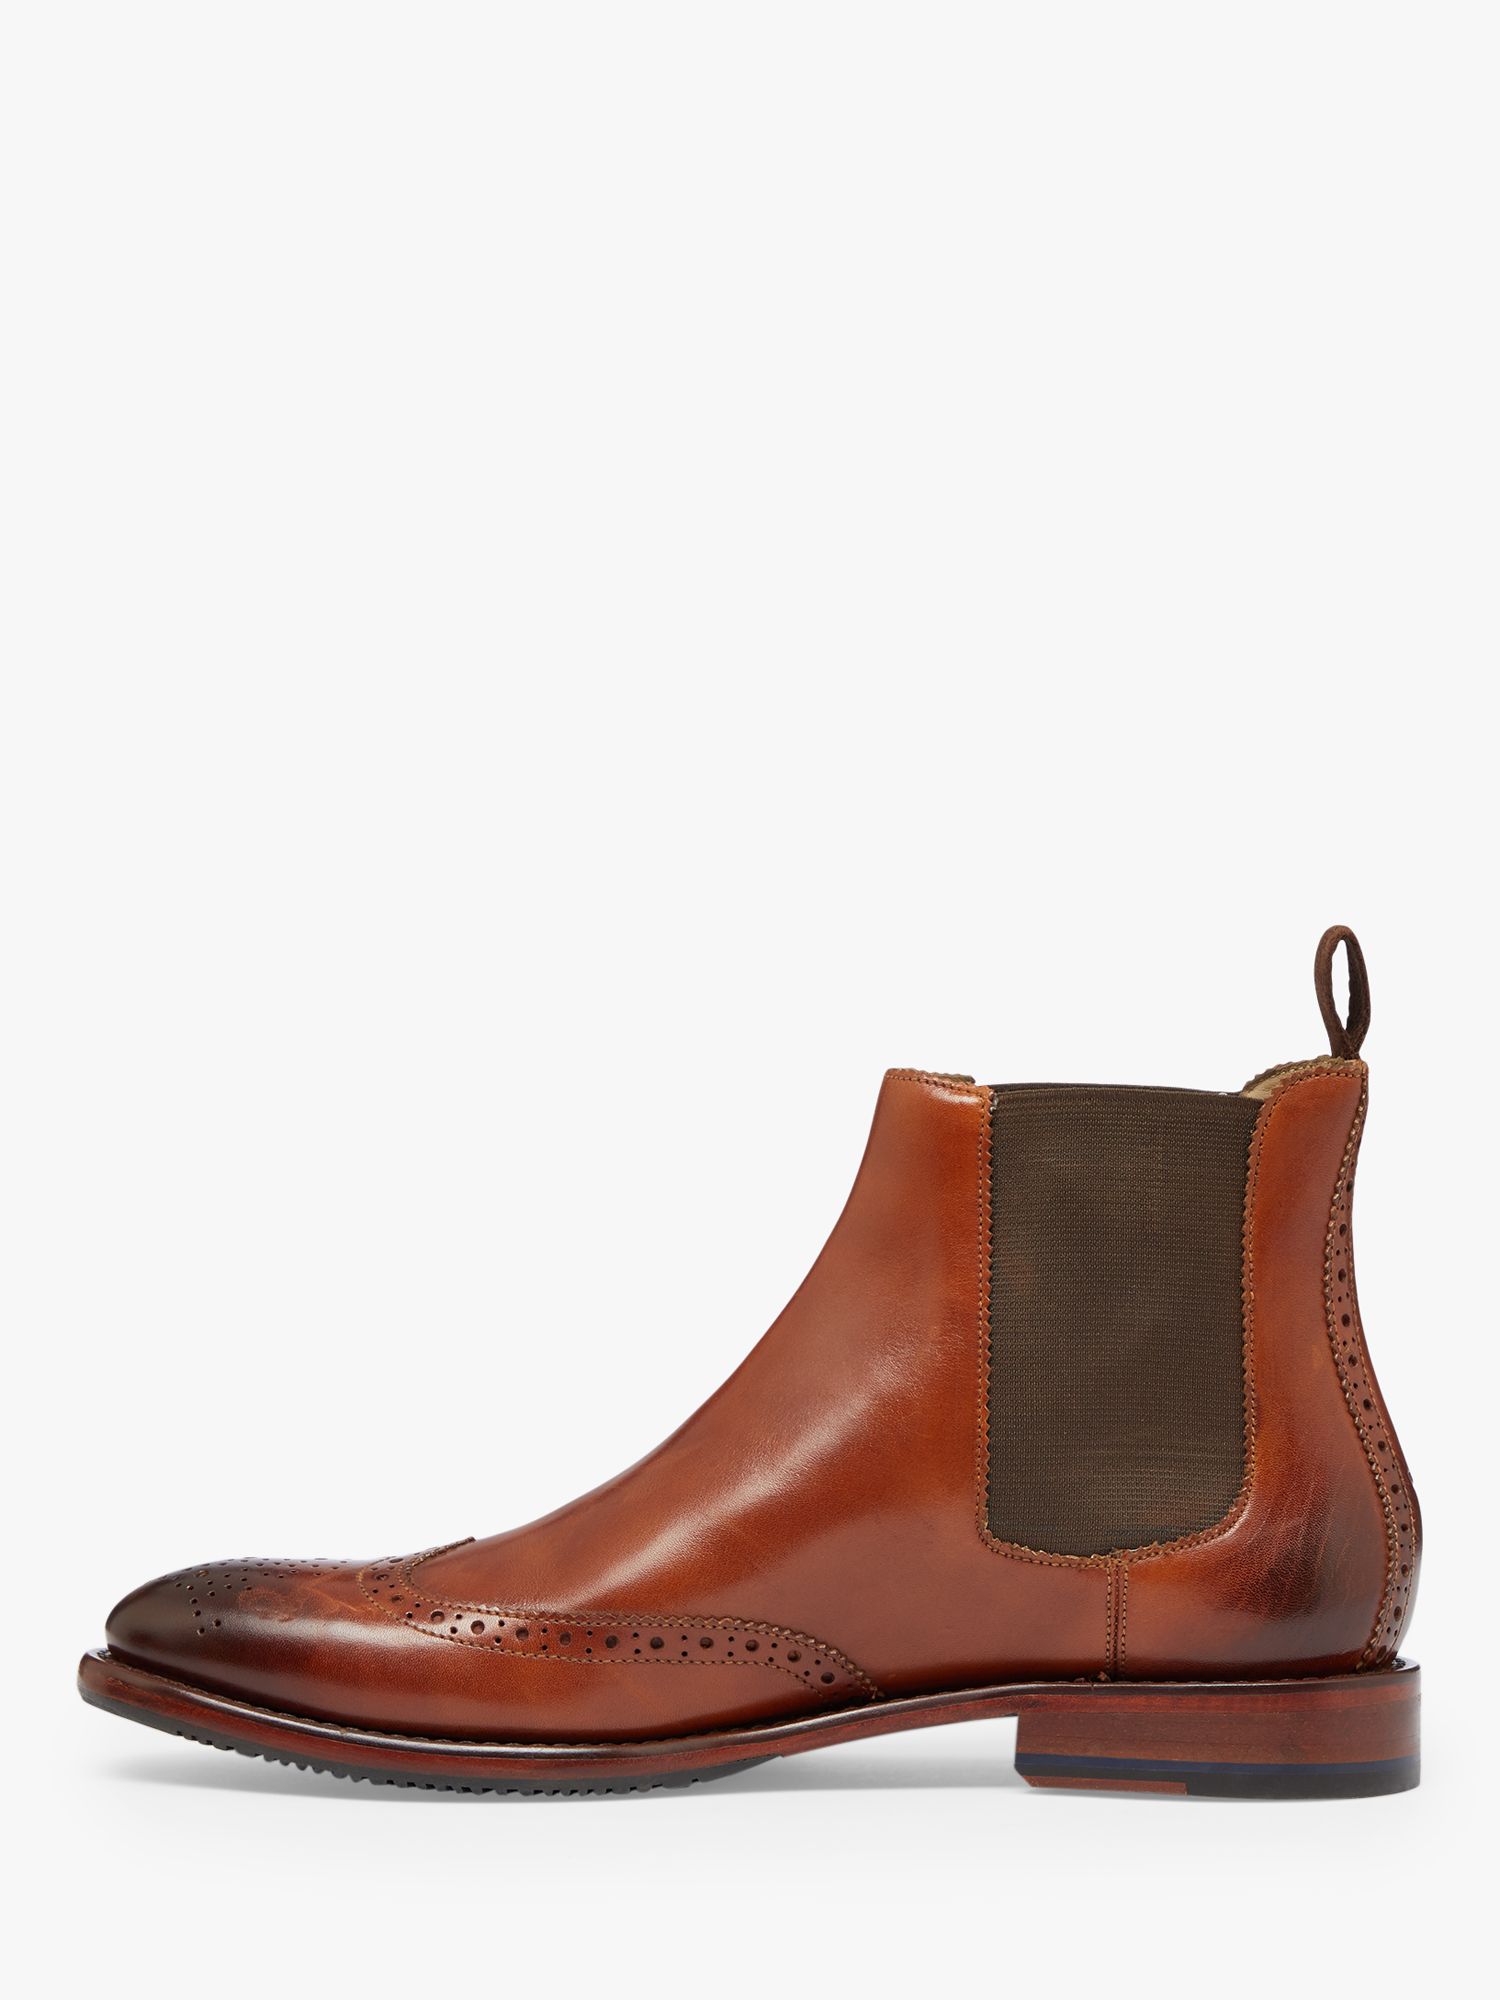 Oliver Sweeney Portrush Antiqued Leather Chelsea Boots, Tan at John ...